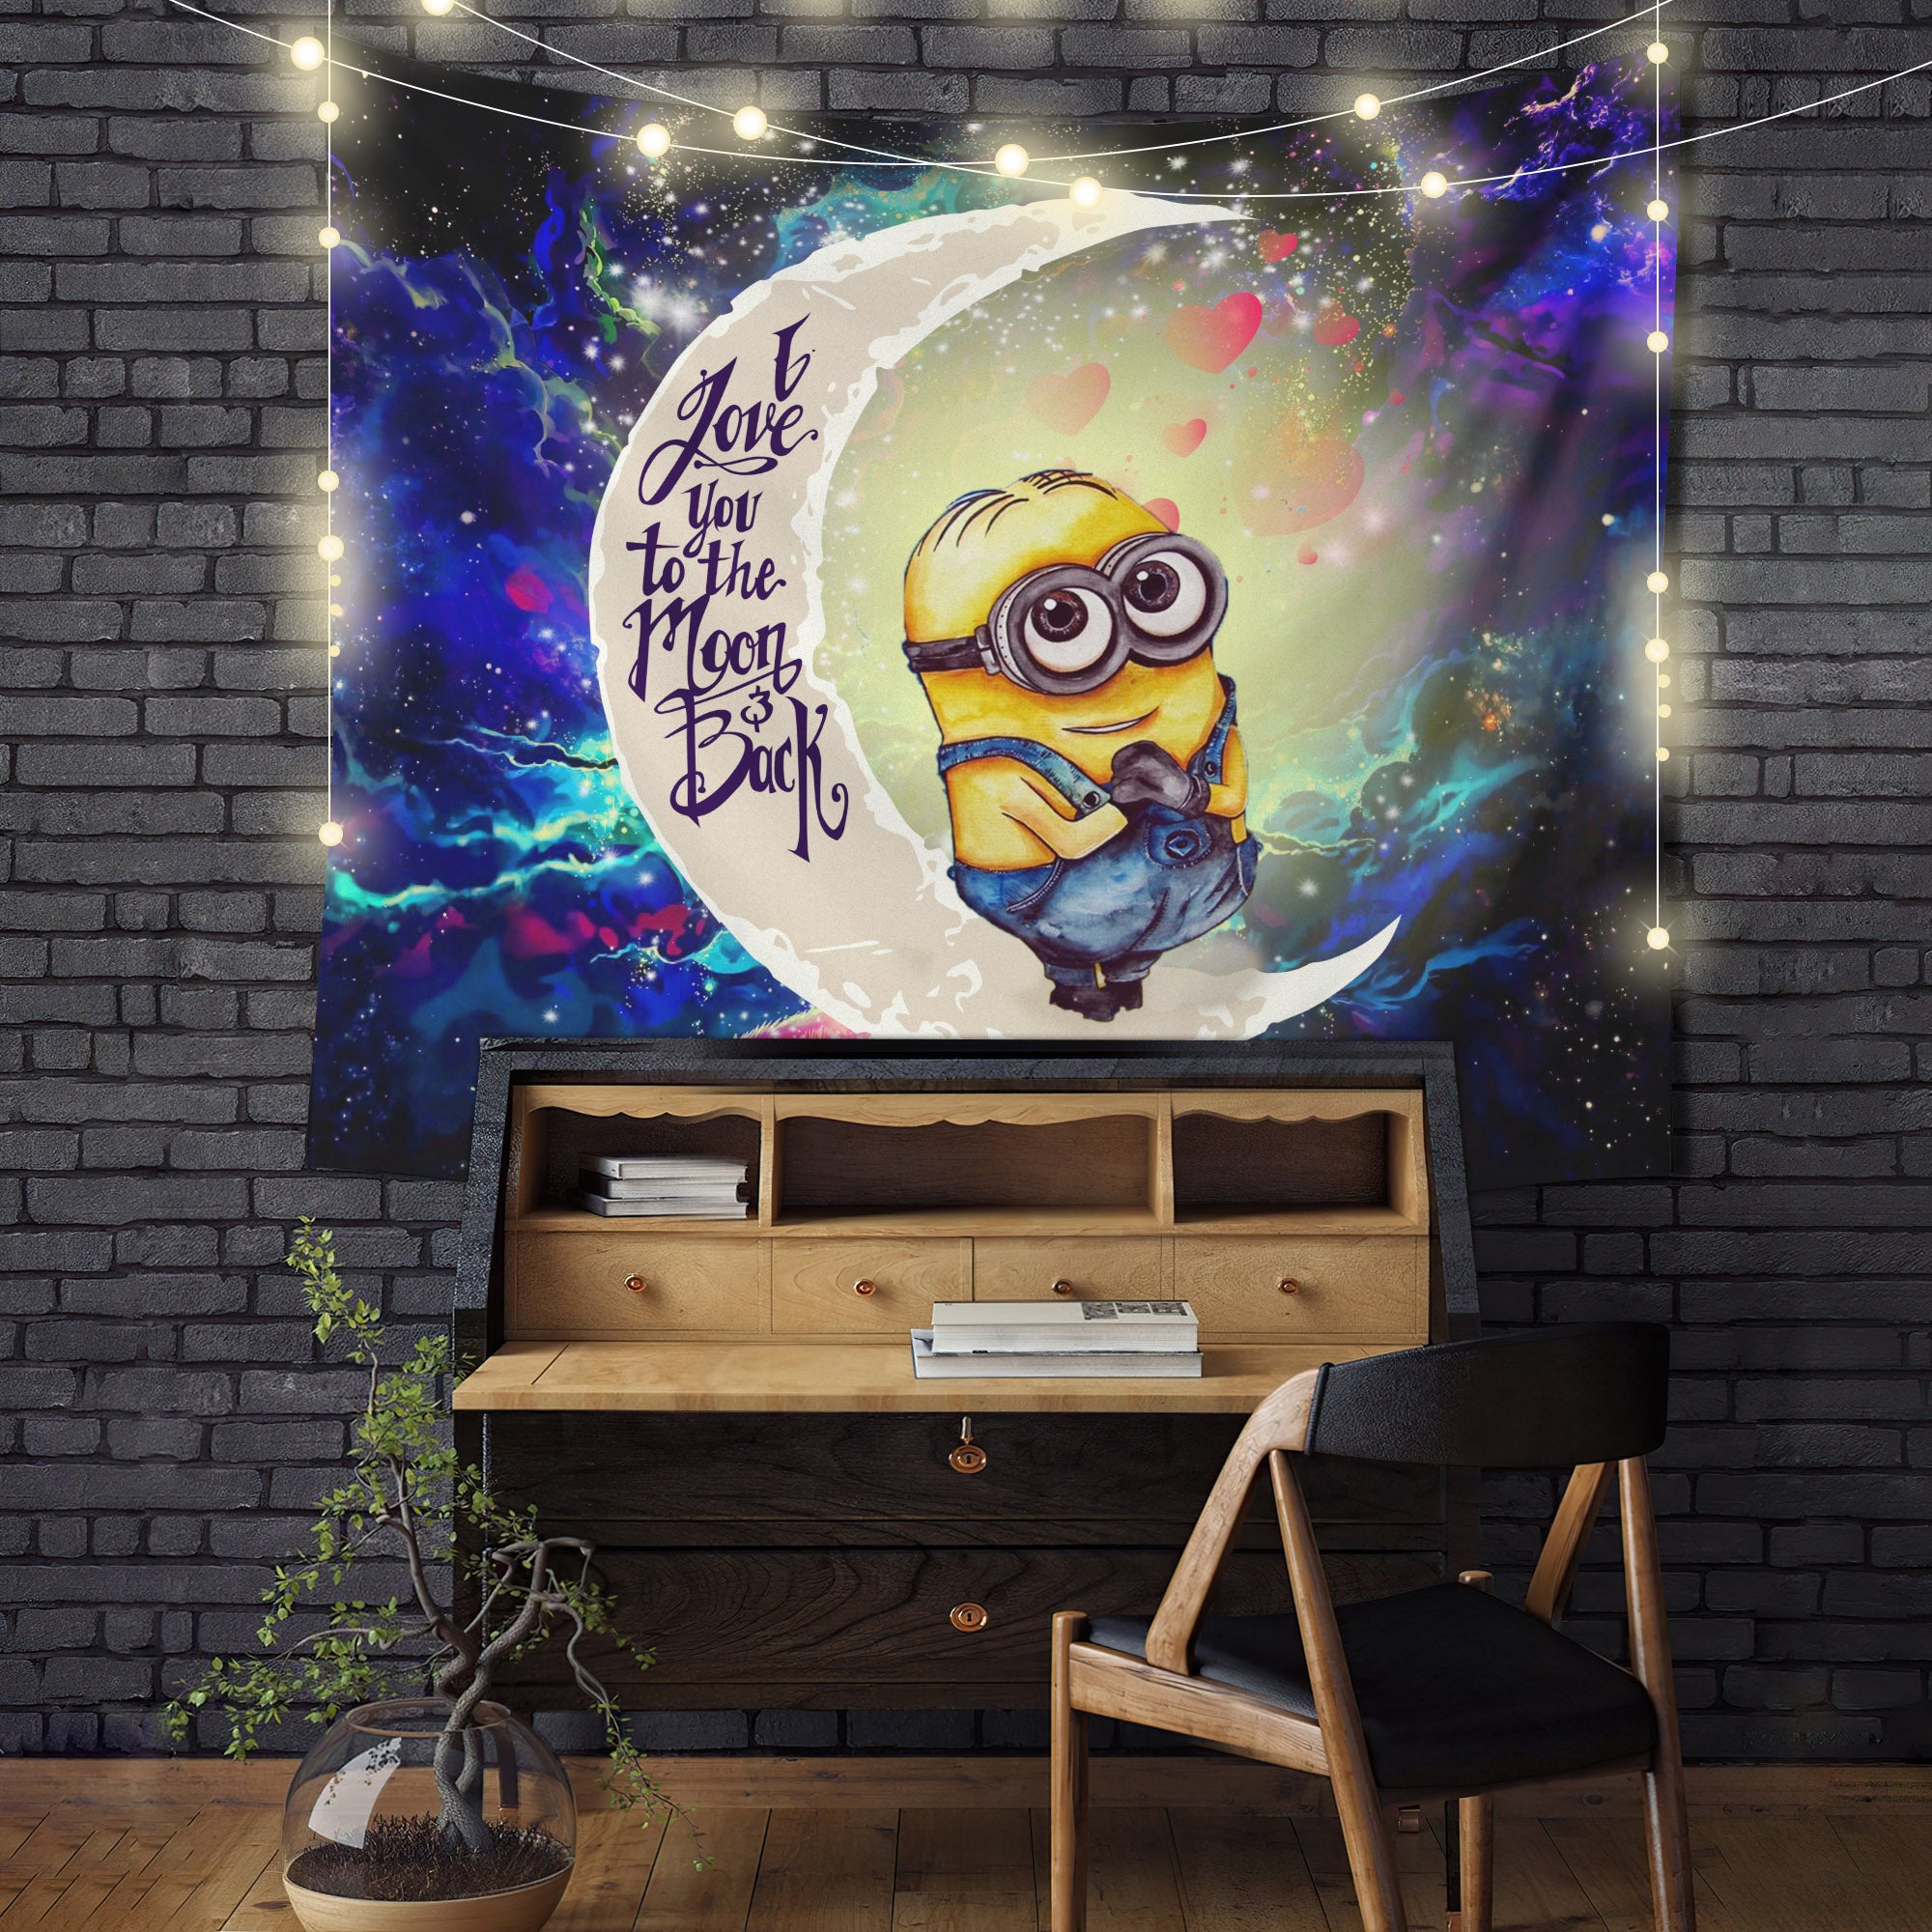 Cute Minions Despicable Me Moon And Back Galaxy Tapestry Room Decor